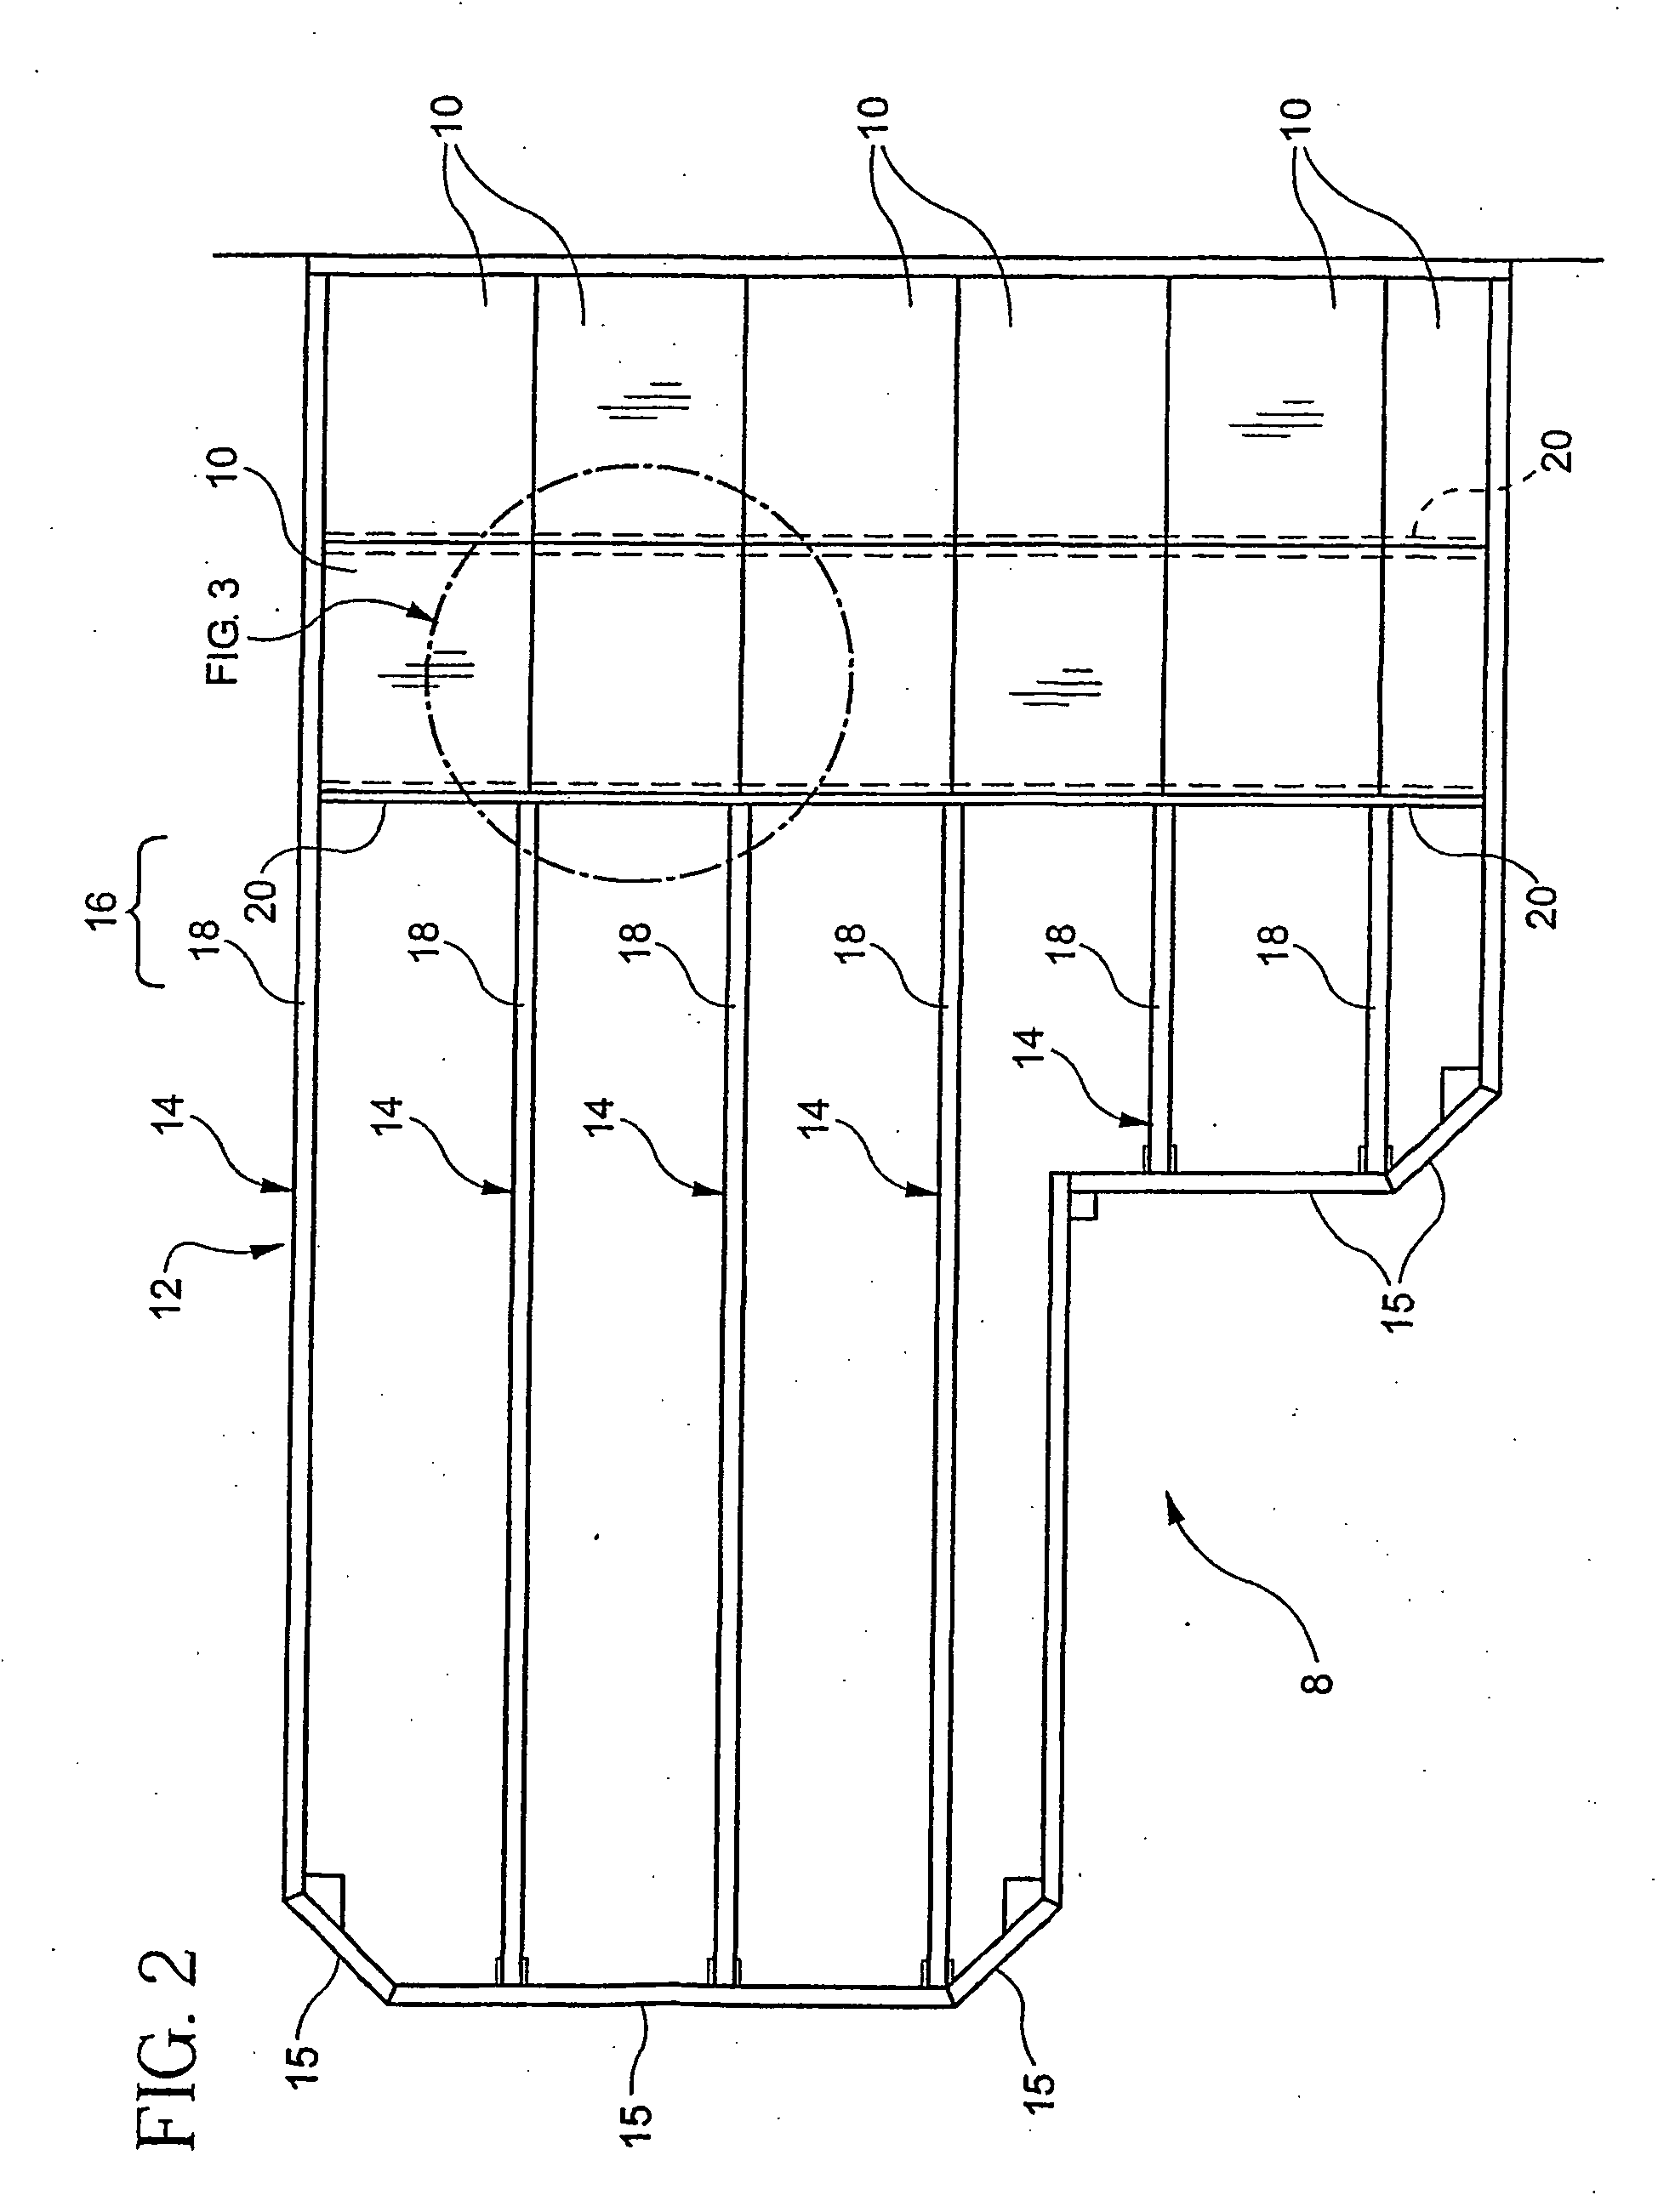 Prefabricated modular building component and method of use